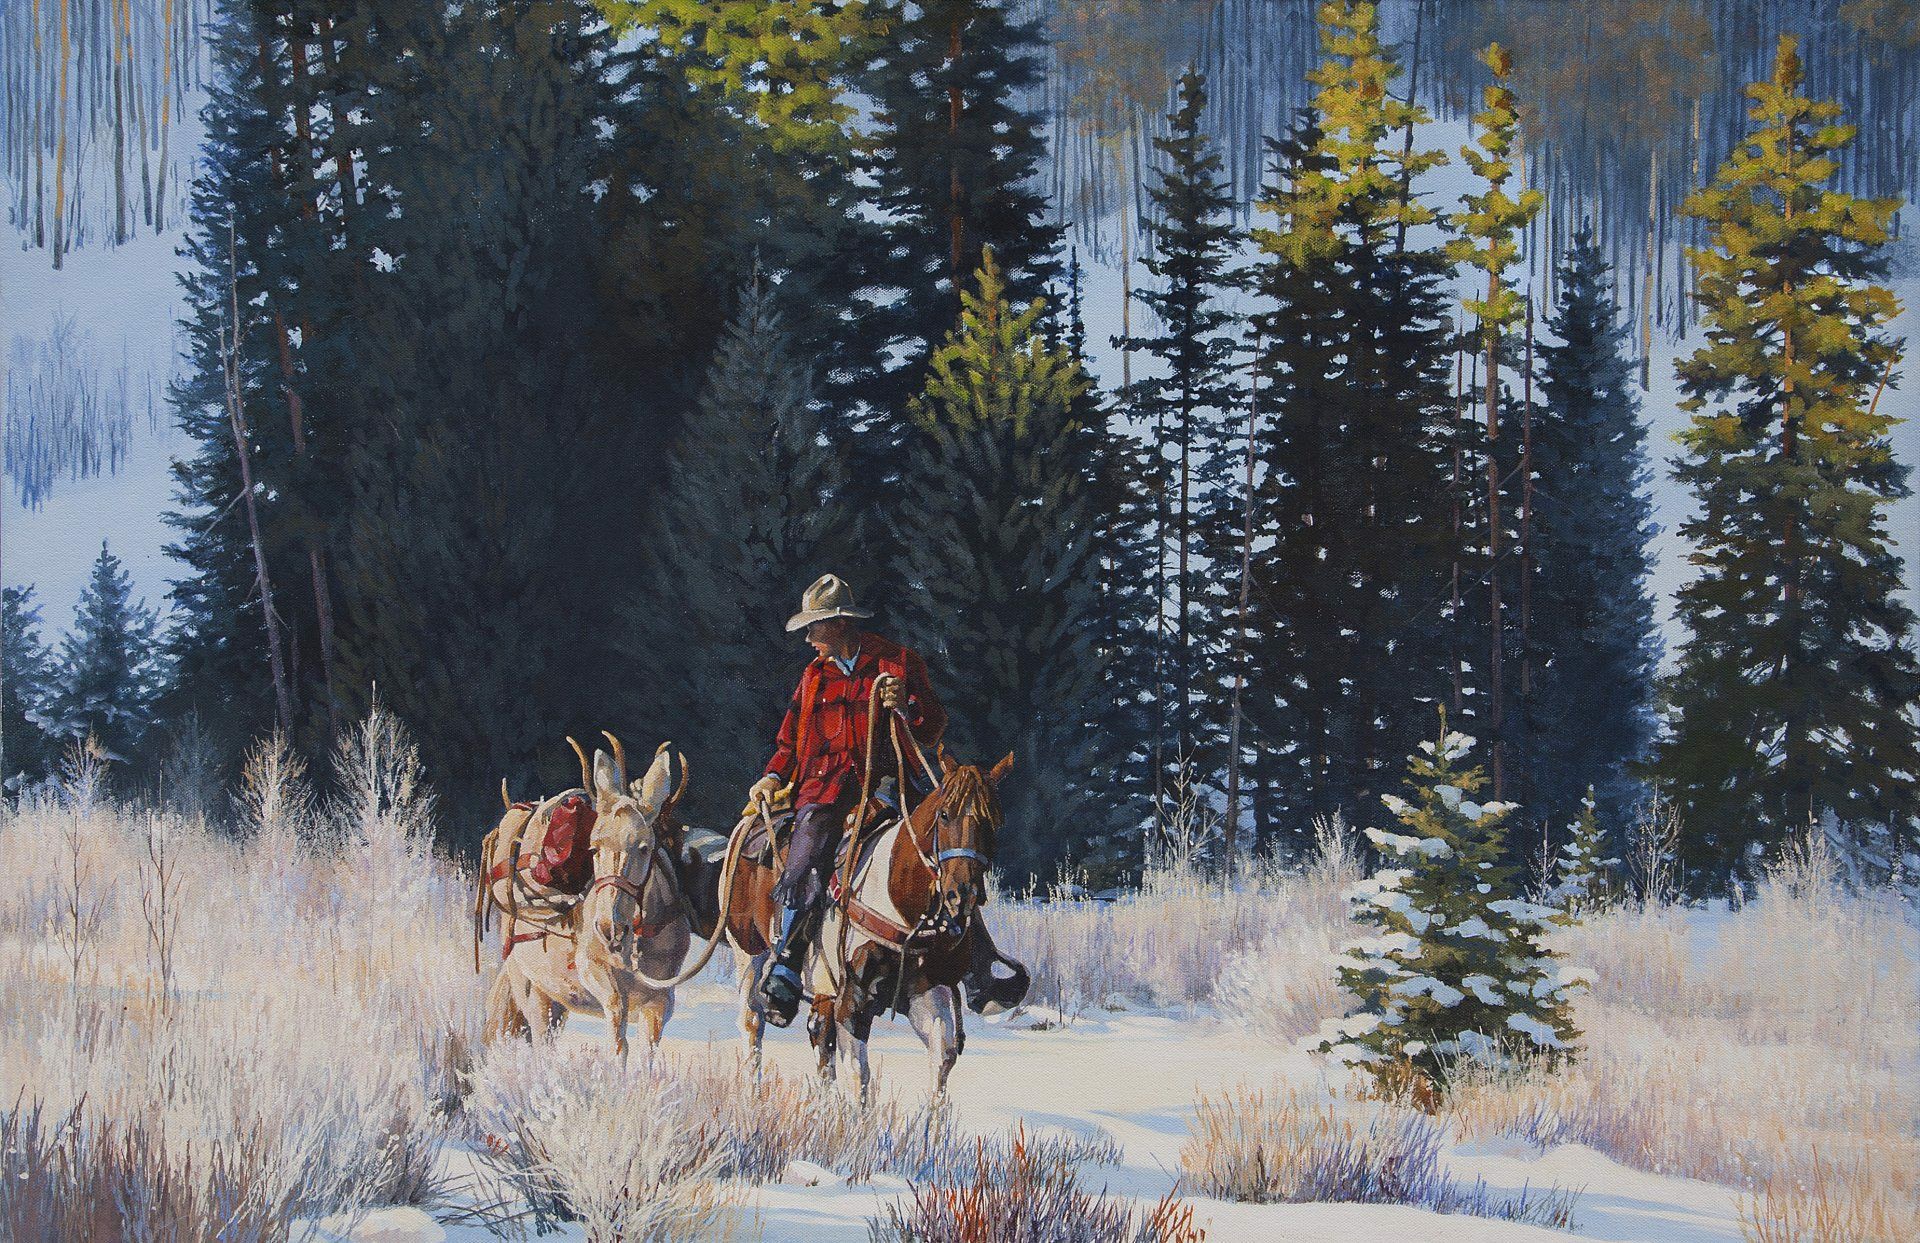 I'll Be Home For Christmas by Ed DuRose